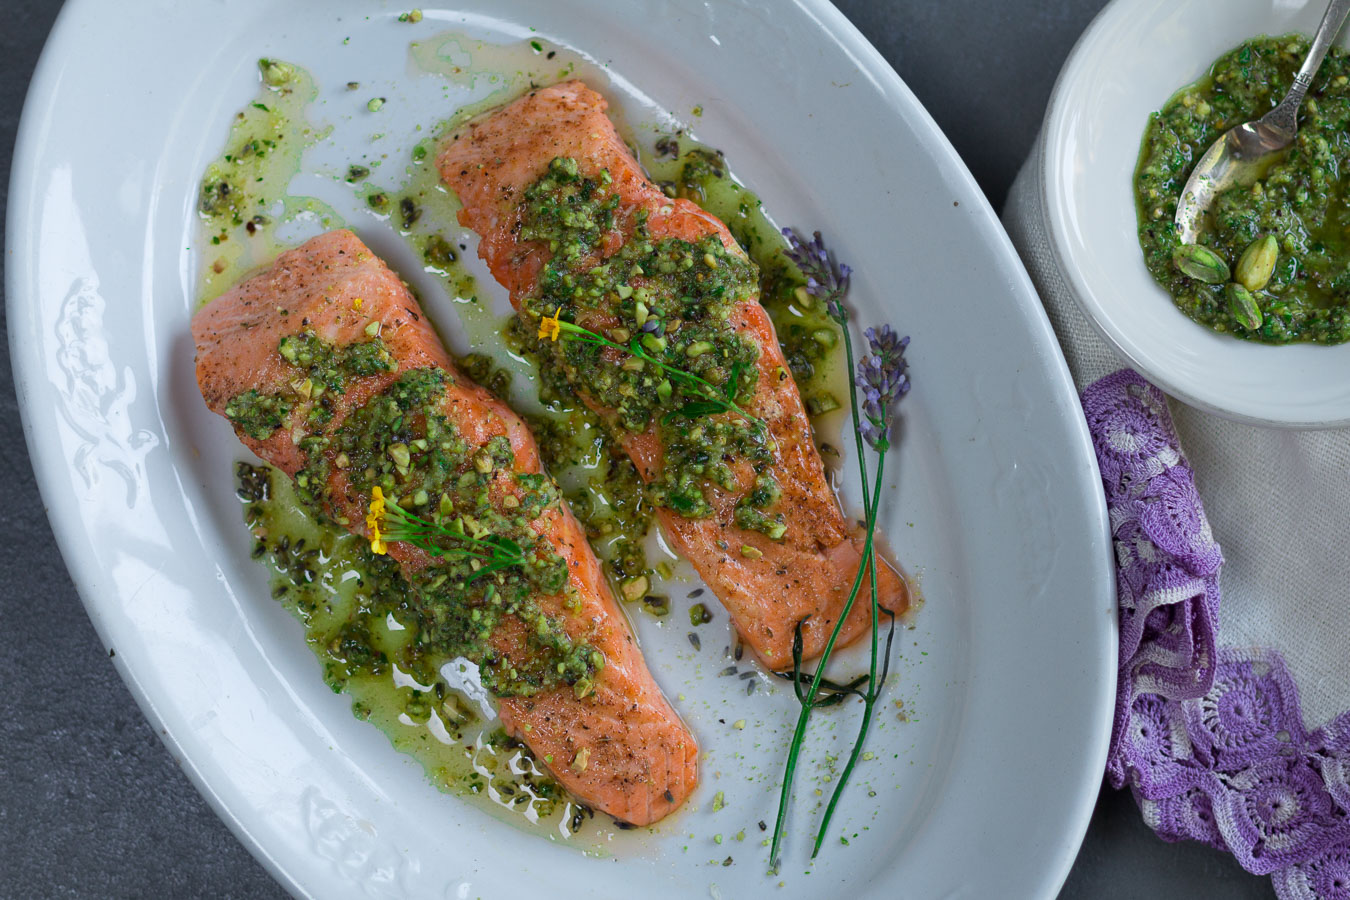 Cedar Planked Salmon with an easy-to prepare Planked Salmon with Pistachio-Tarragon & Lavender Gremolata Pistachio Planked Salmon with Pistachio-Tarragon & Lavender Gremolata smothered on top